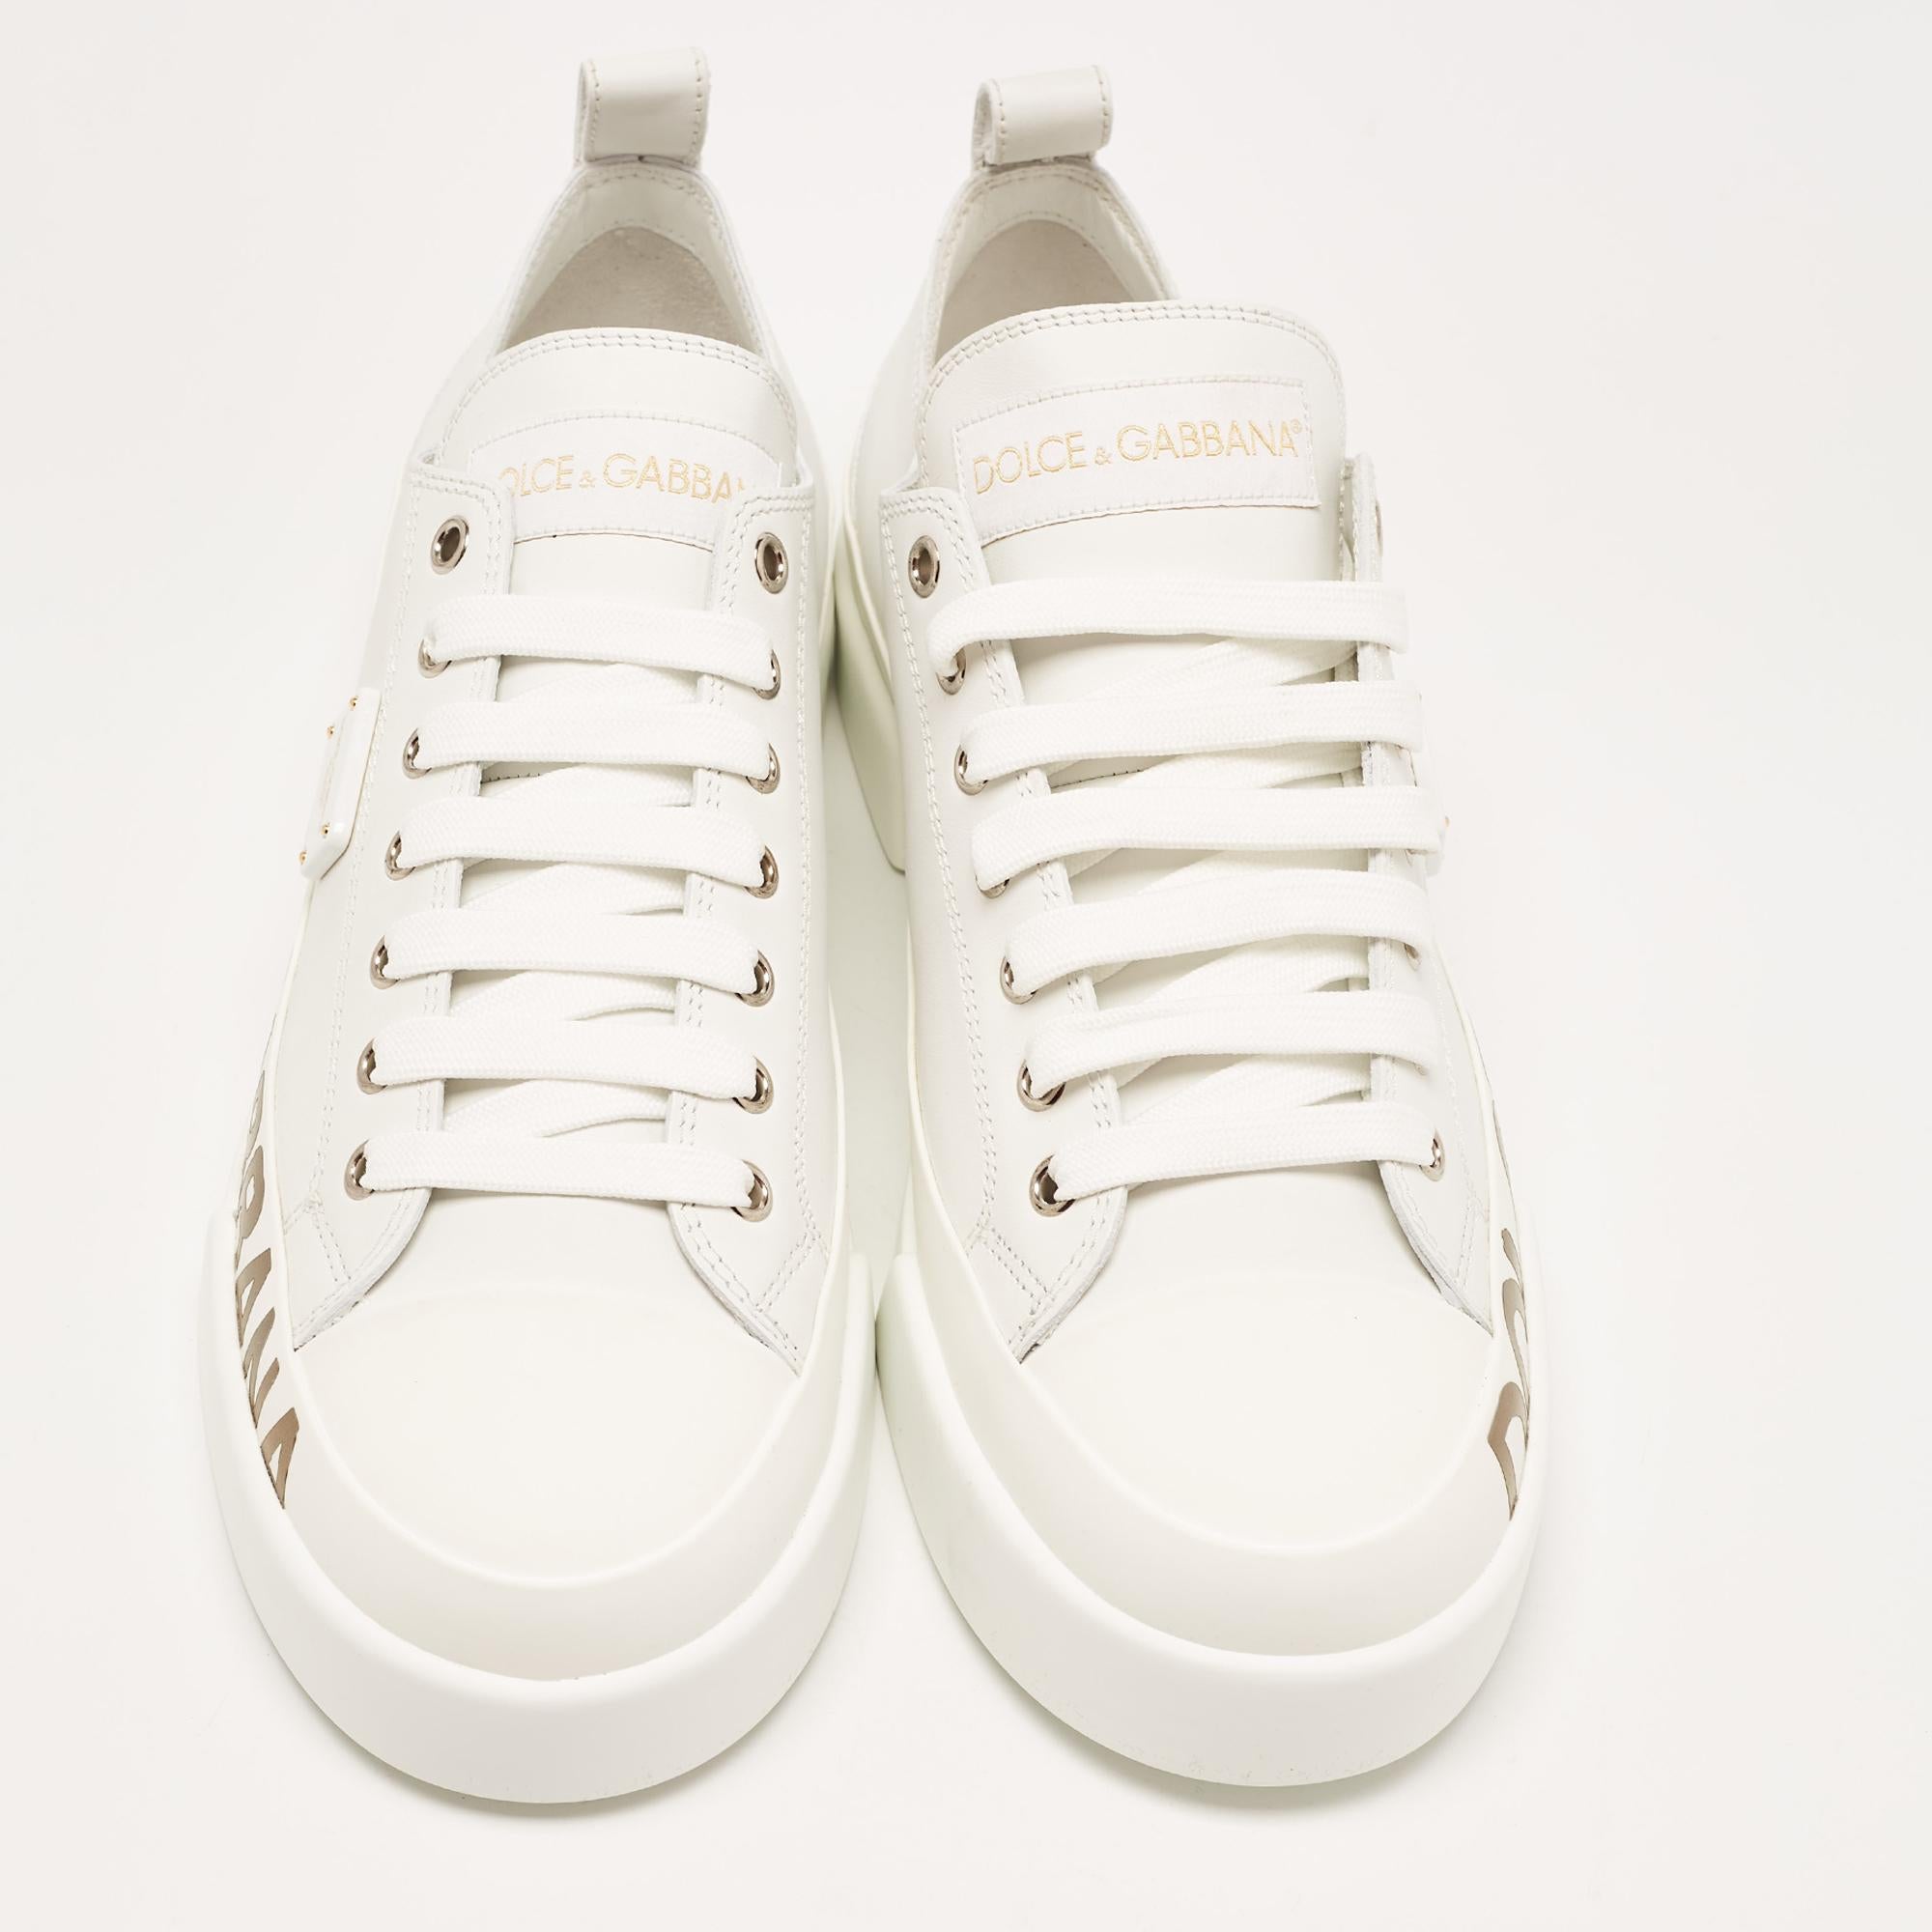 Coming in a classic silhouette, these designer sneakers are a seamless combination of luxury, comfort, and style. These sneakers are finished with signature details and comfortable insoles.

Includes: Original Dustbag, Original Box